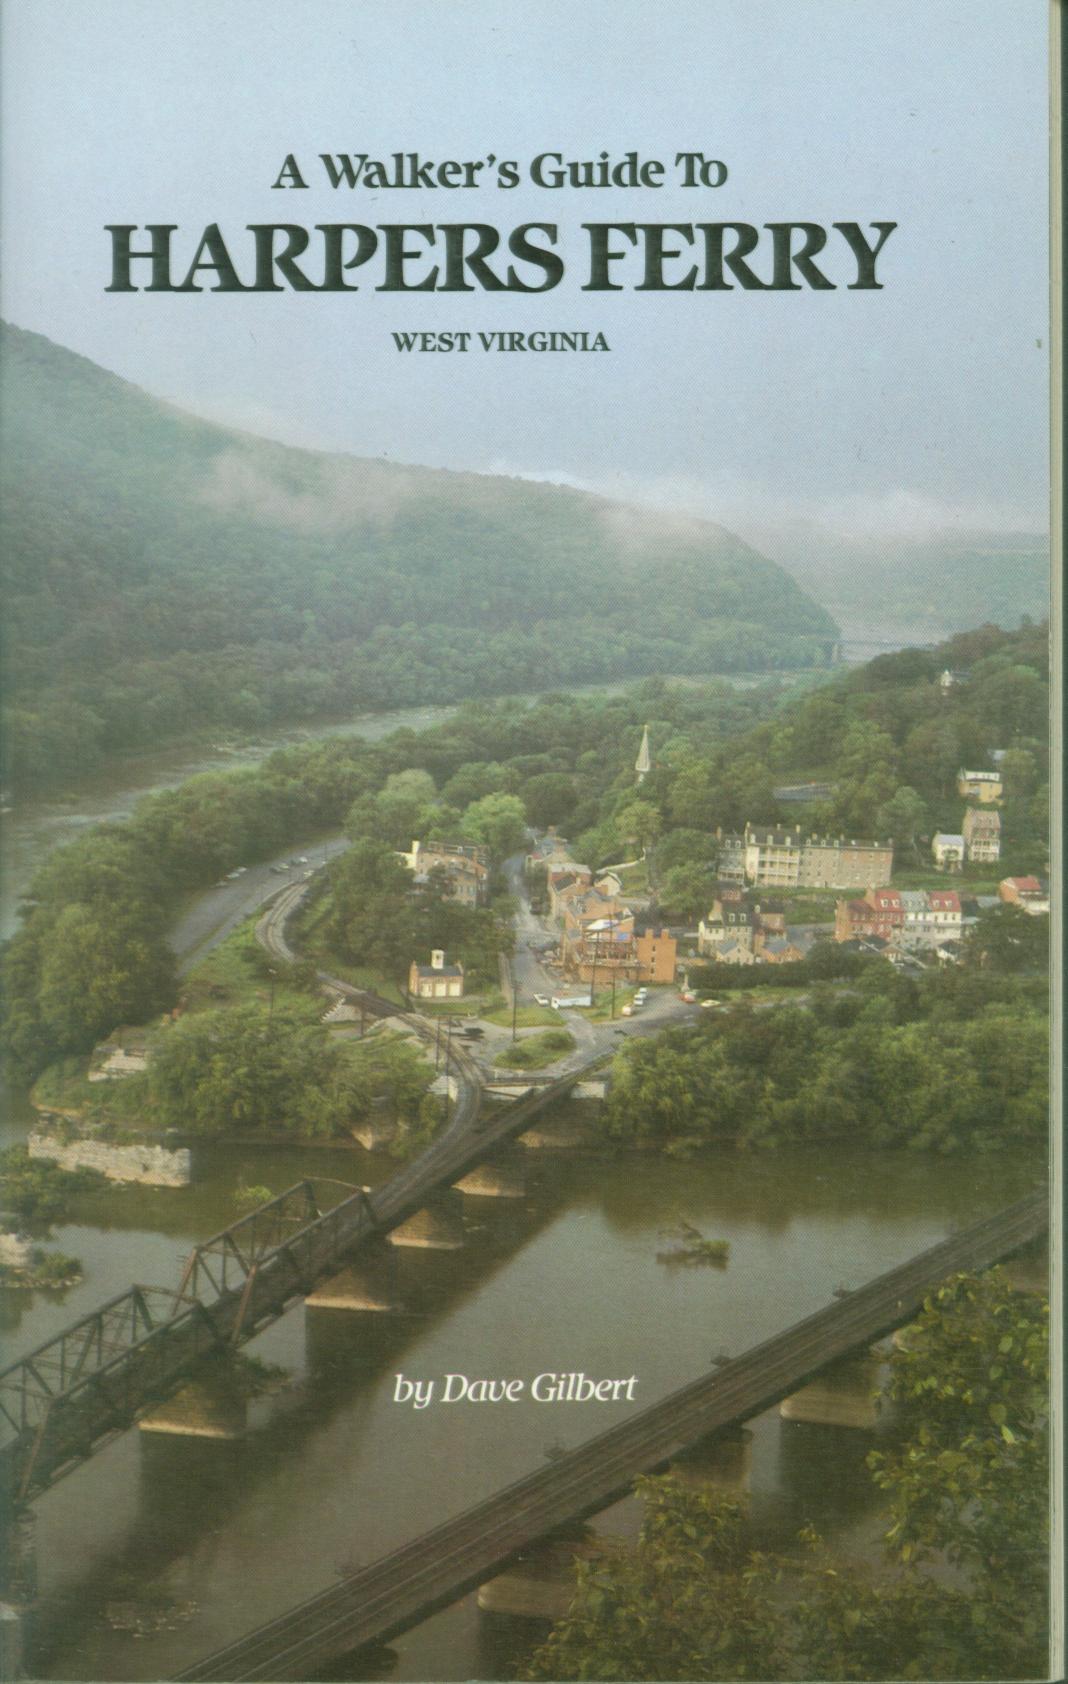 A WALKER'S GUIDE TO HARPERS FERRY, WEST VIRGINIA.